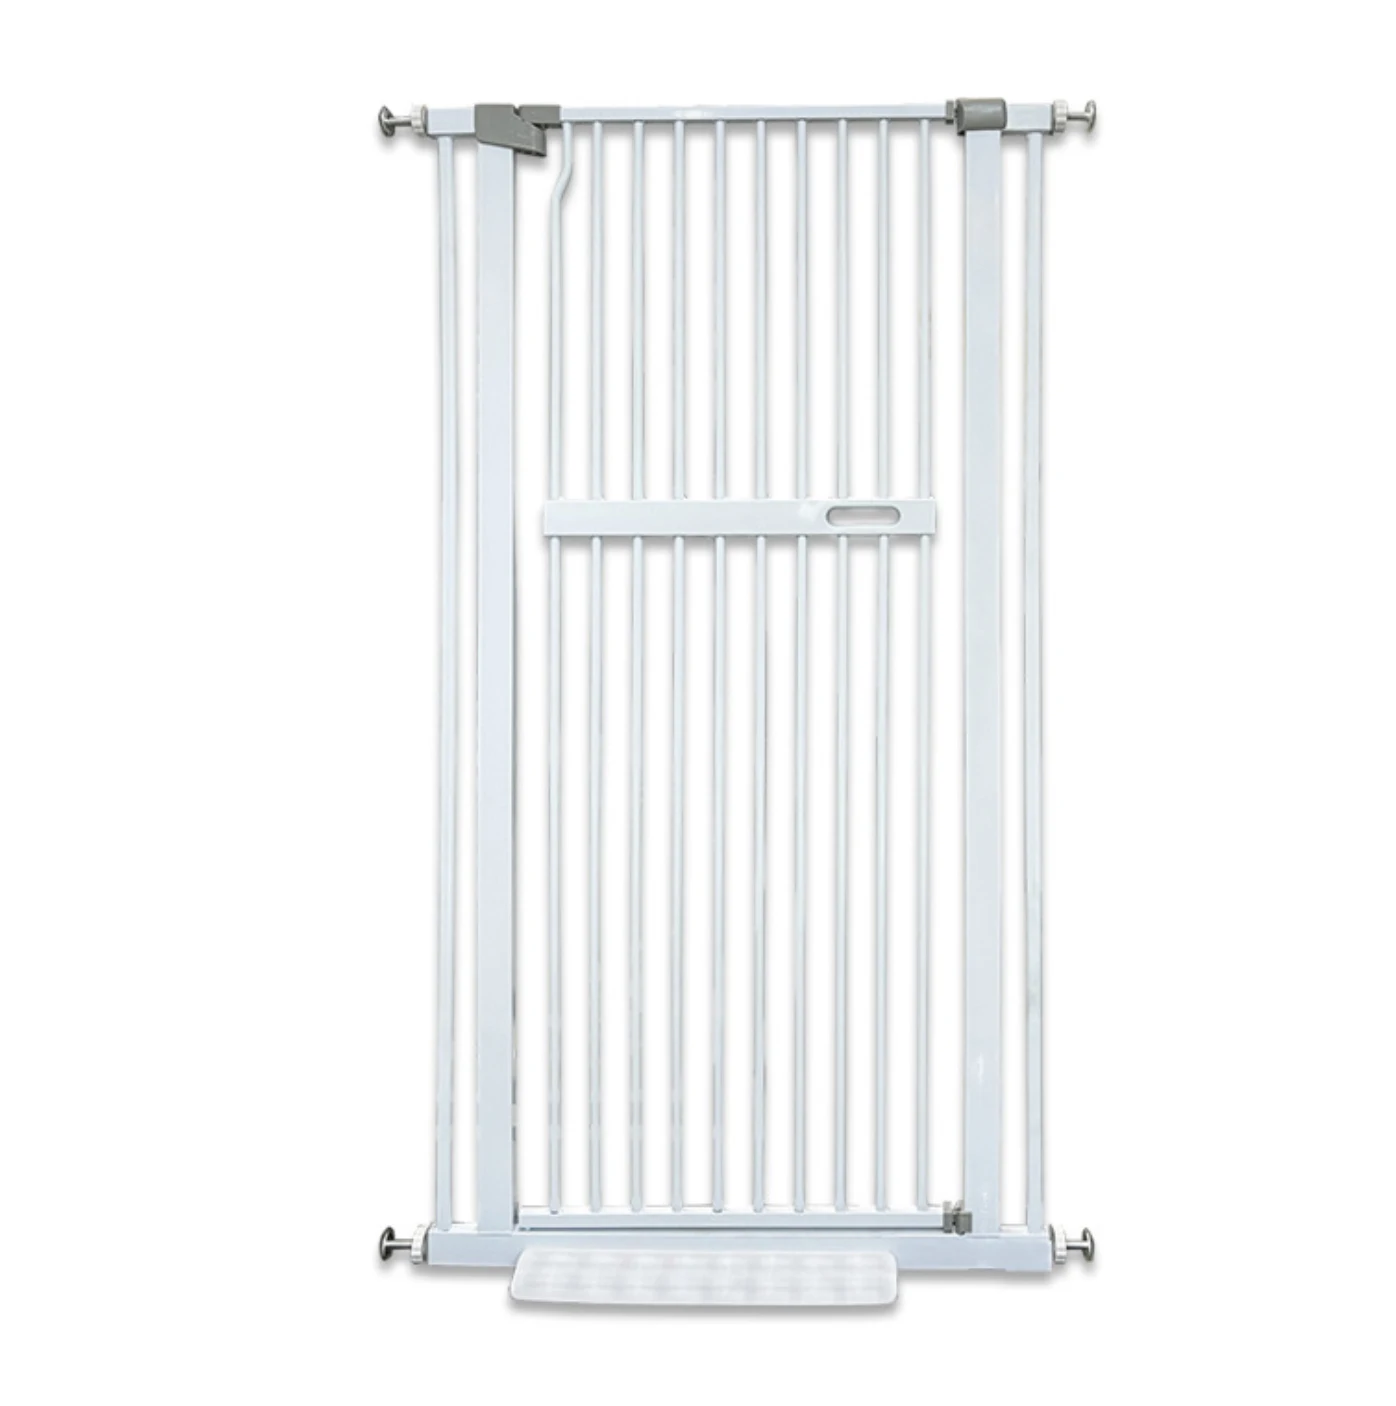 

Upgrade Extra Wide Temporary Pet Playground Fence Security Door Safety Stair Pet Dog Cat Baby Fence Gate, White